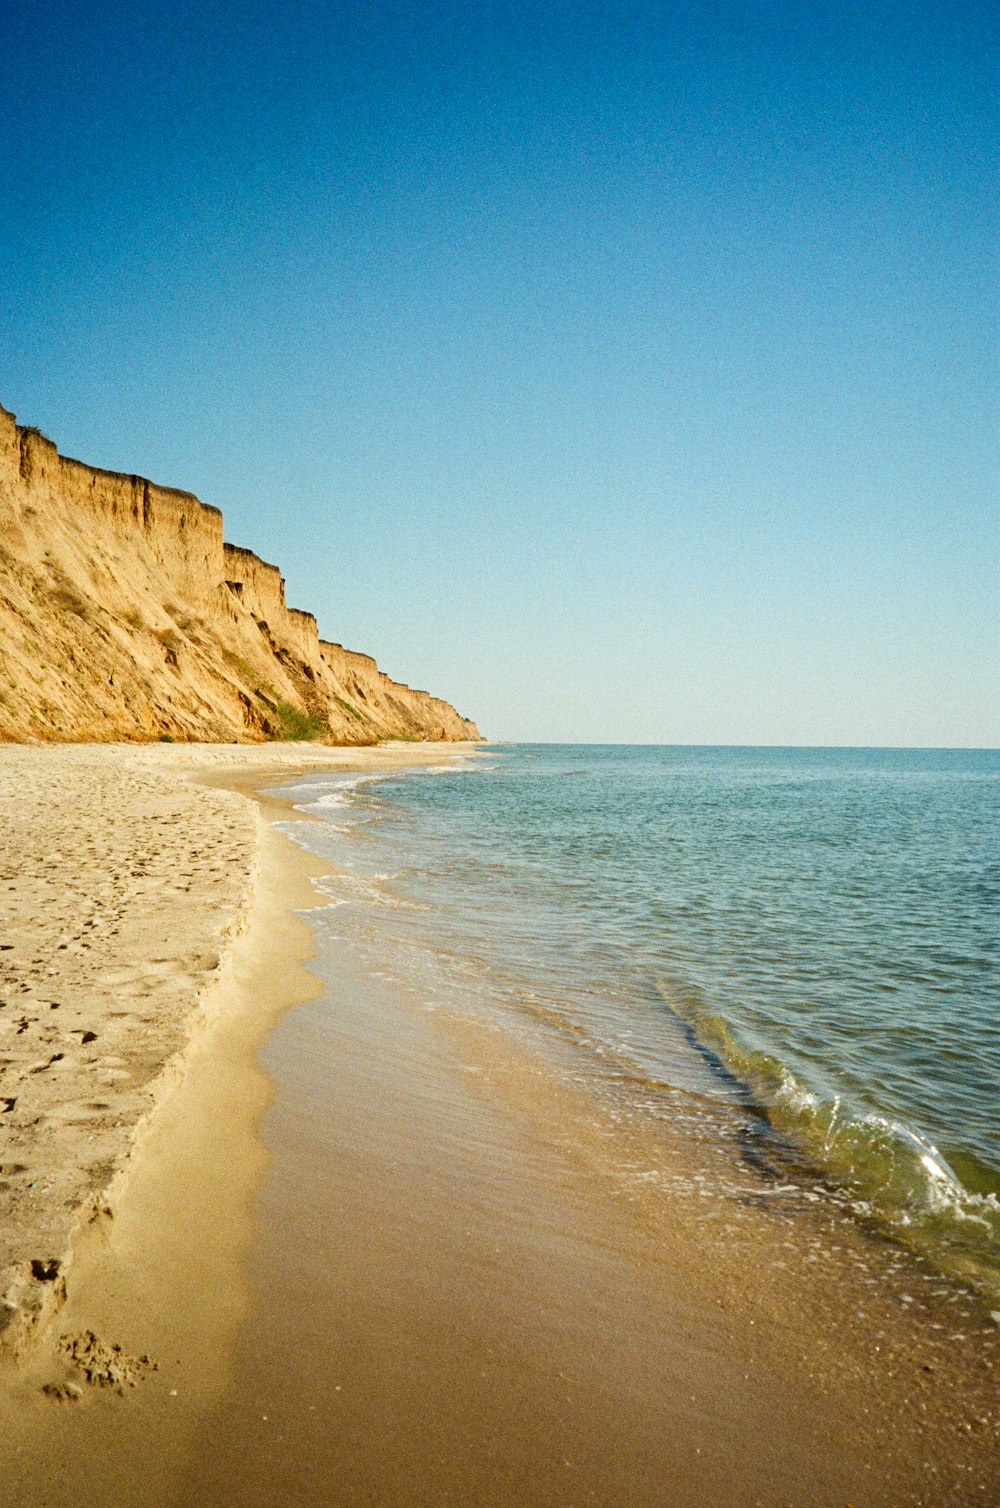 a sandy beach with a cliff in the background